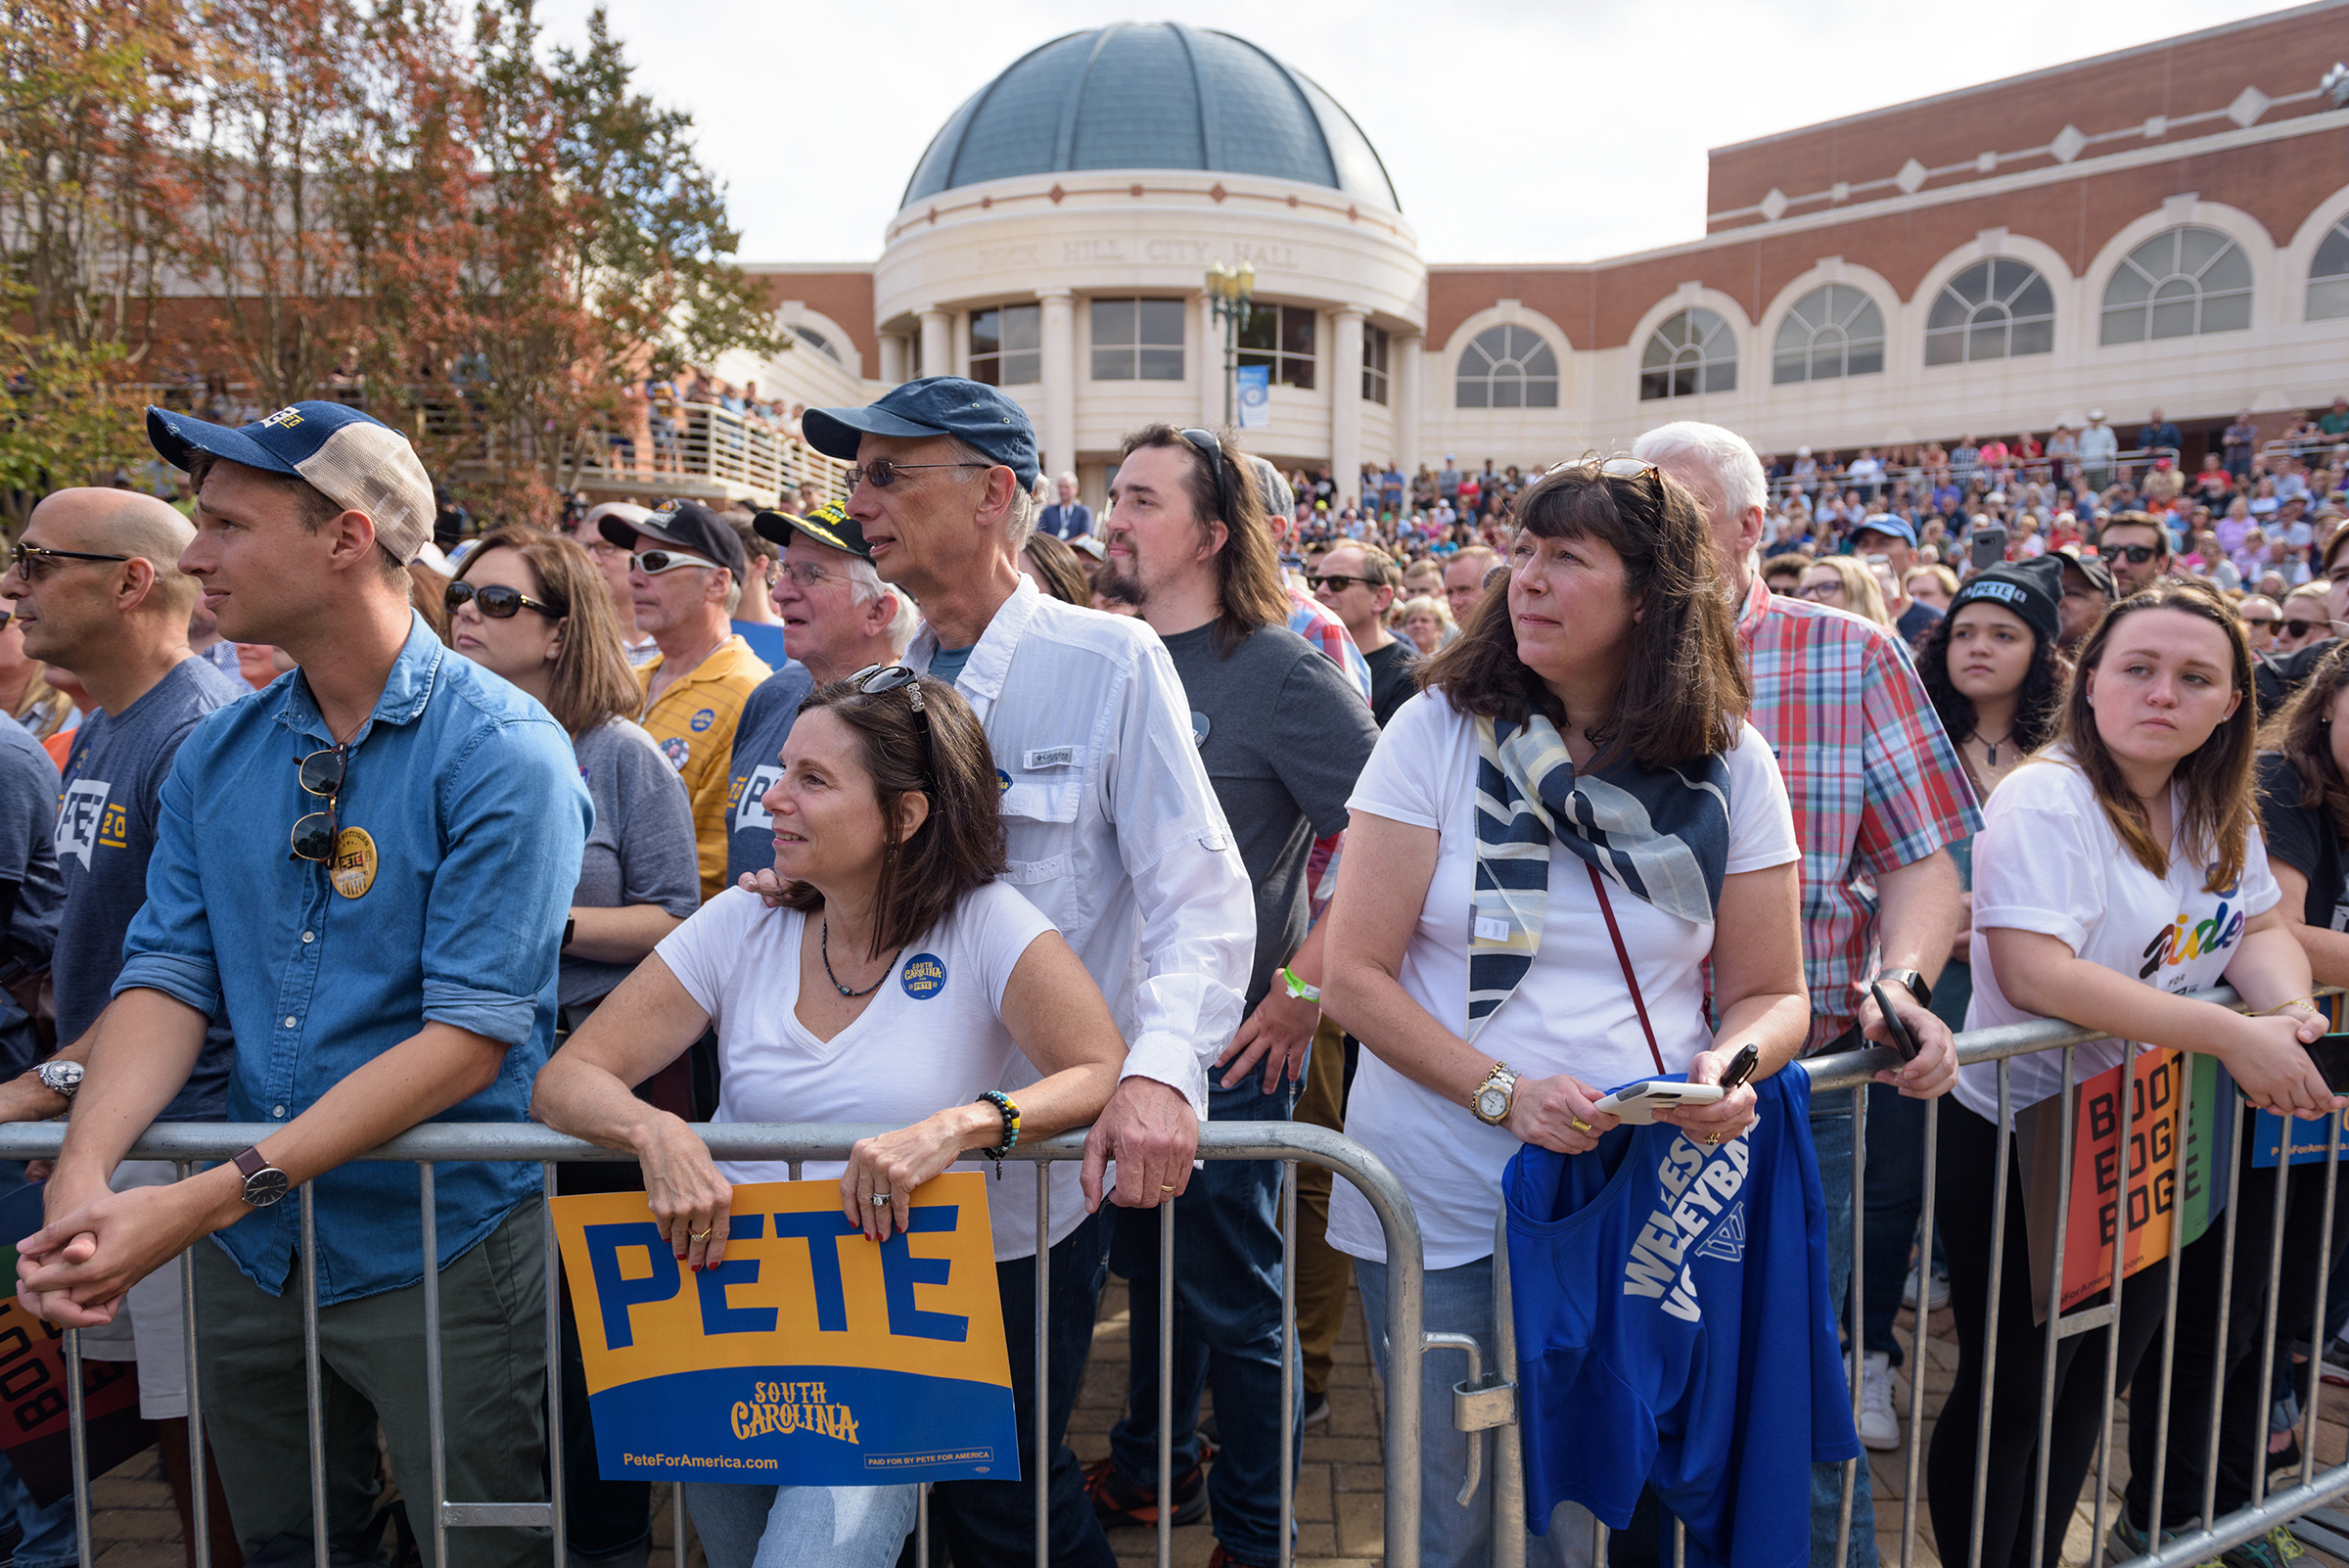 Attendees wait for Mayor Pete Buttigieg of South Bend, Ind., a Democratic presidential hopeful, to arrive at a campaign event in Rock Hill, S.C., on Oct. 26, 2019. (Bryan Cereijo—The New York Times/Redux)